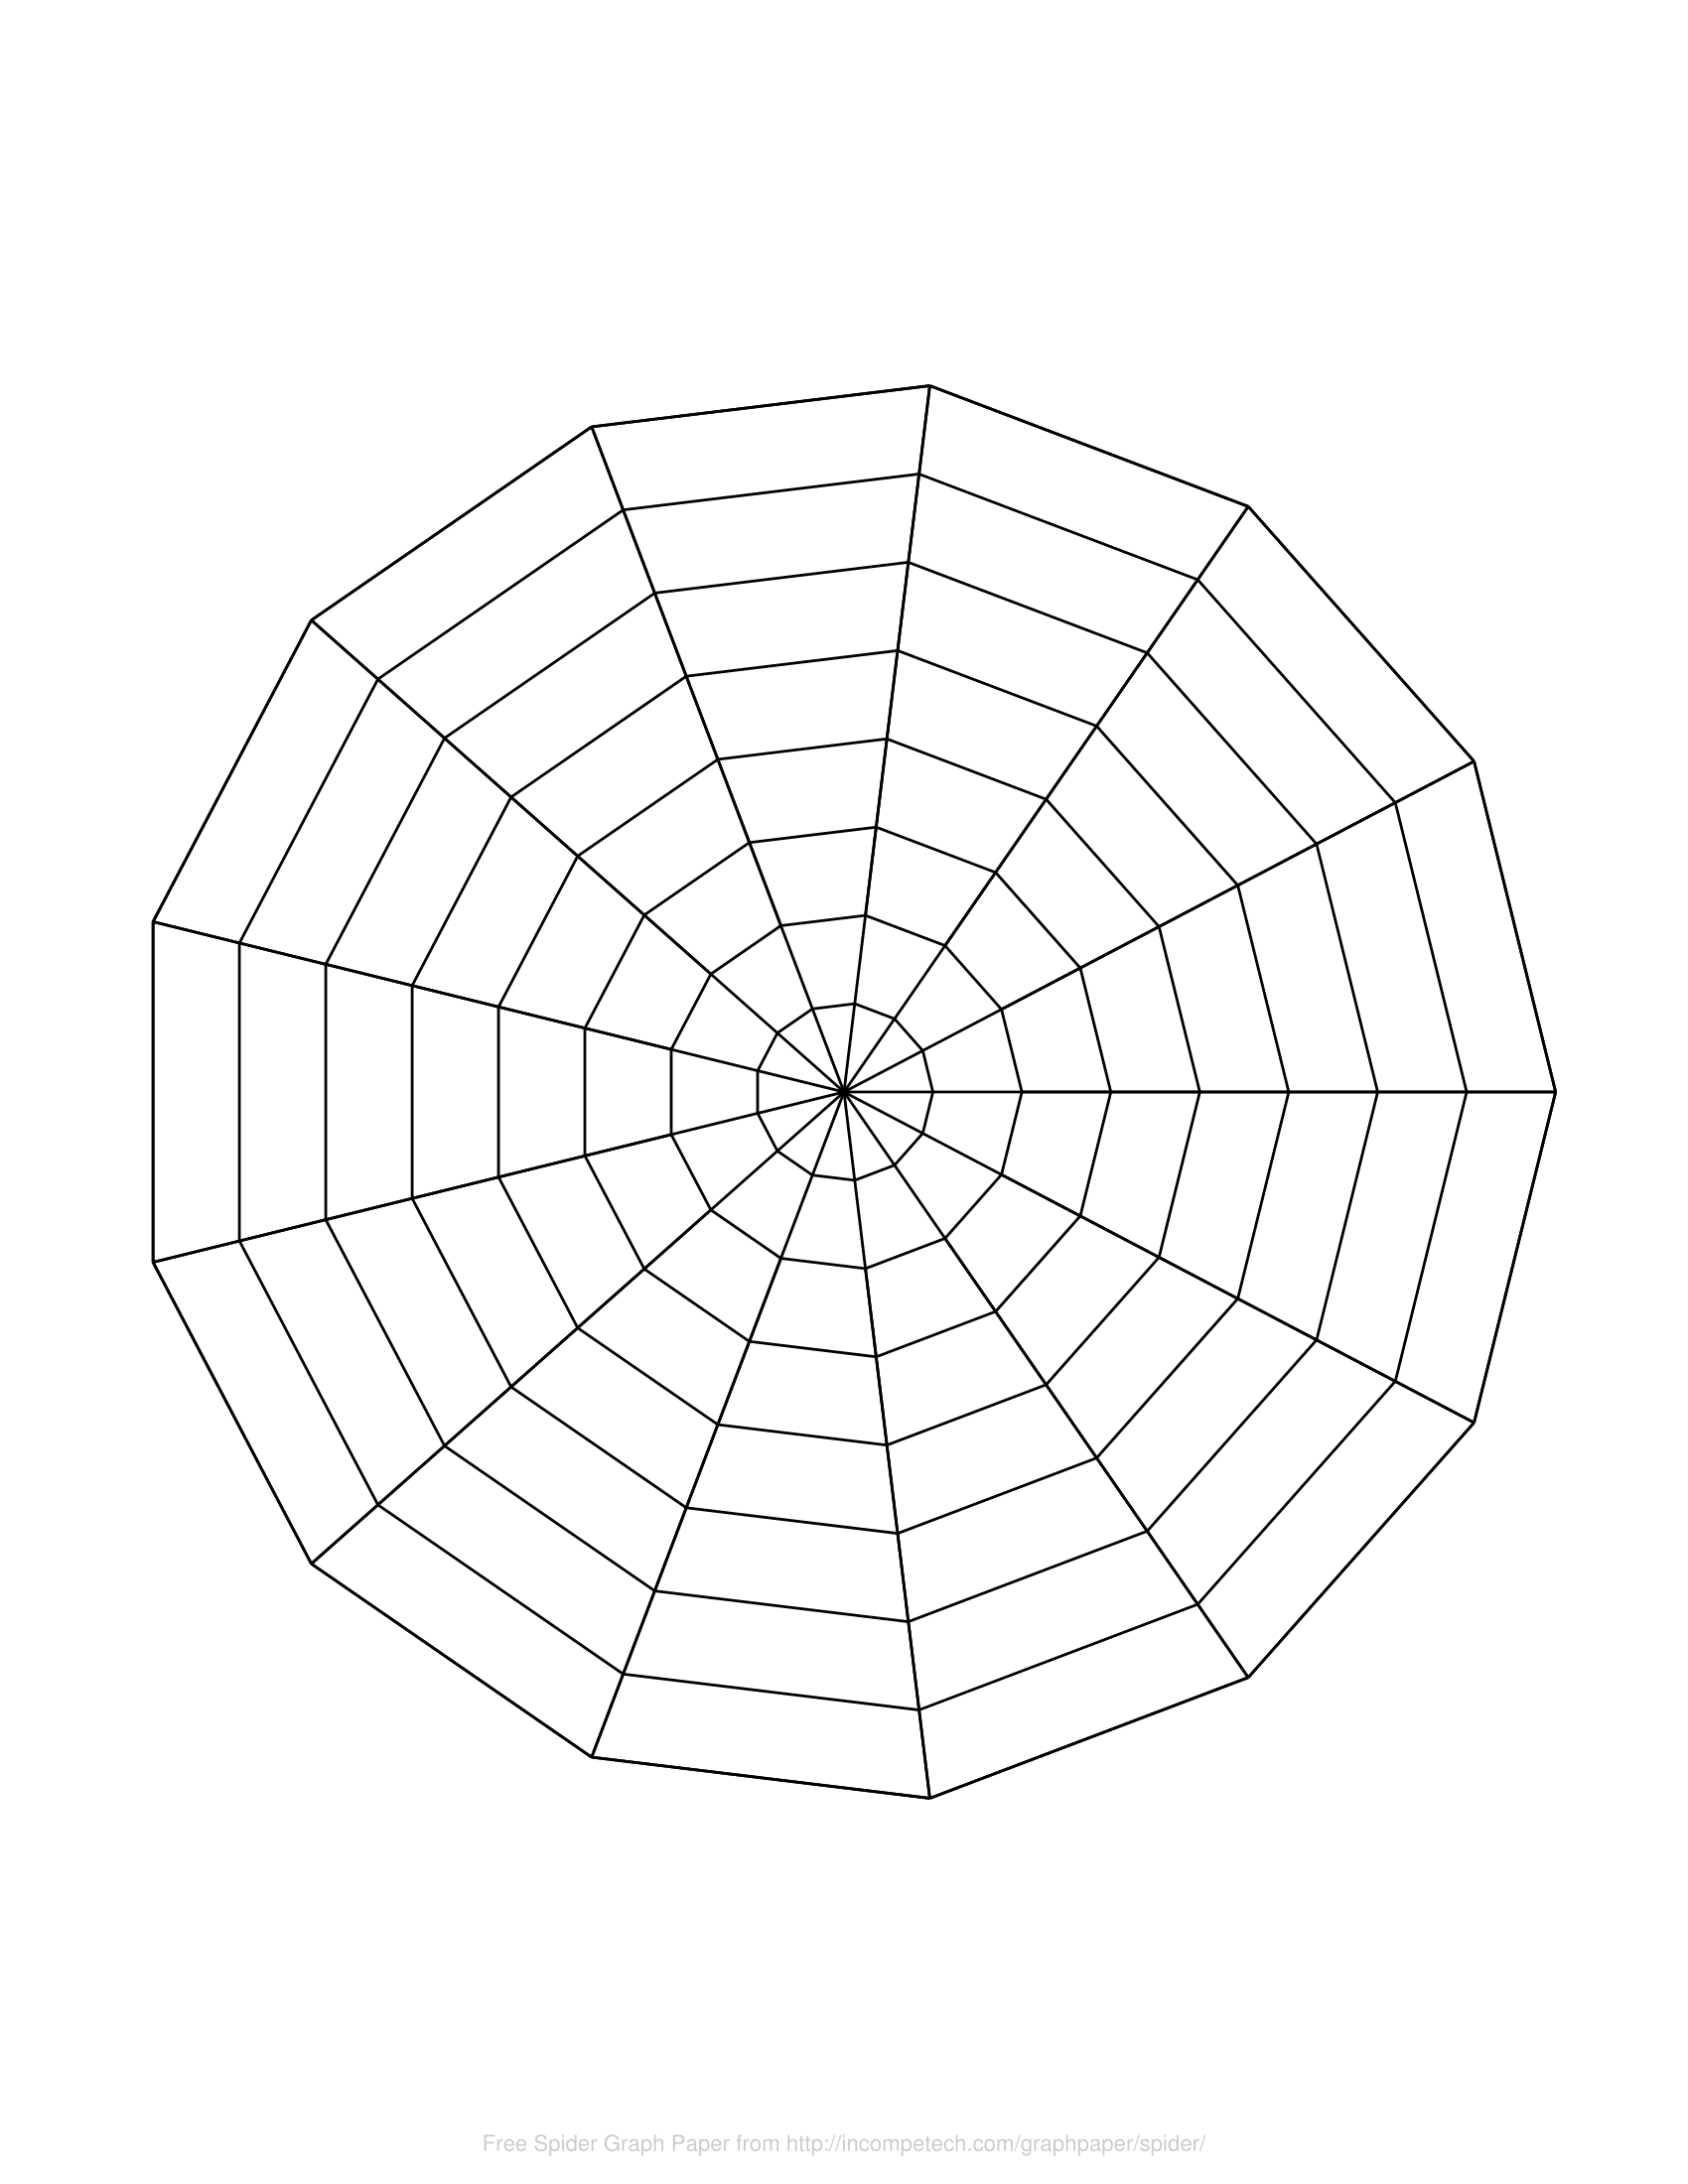 Free Online Graph Paper / Spider Intended For Blank Radar Chart Template